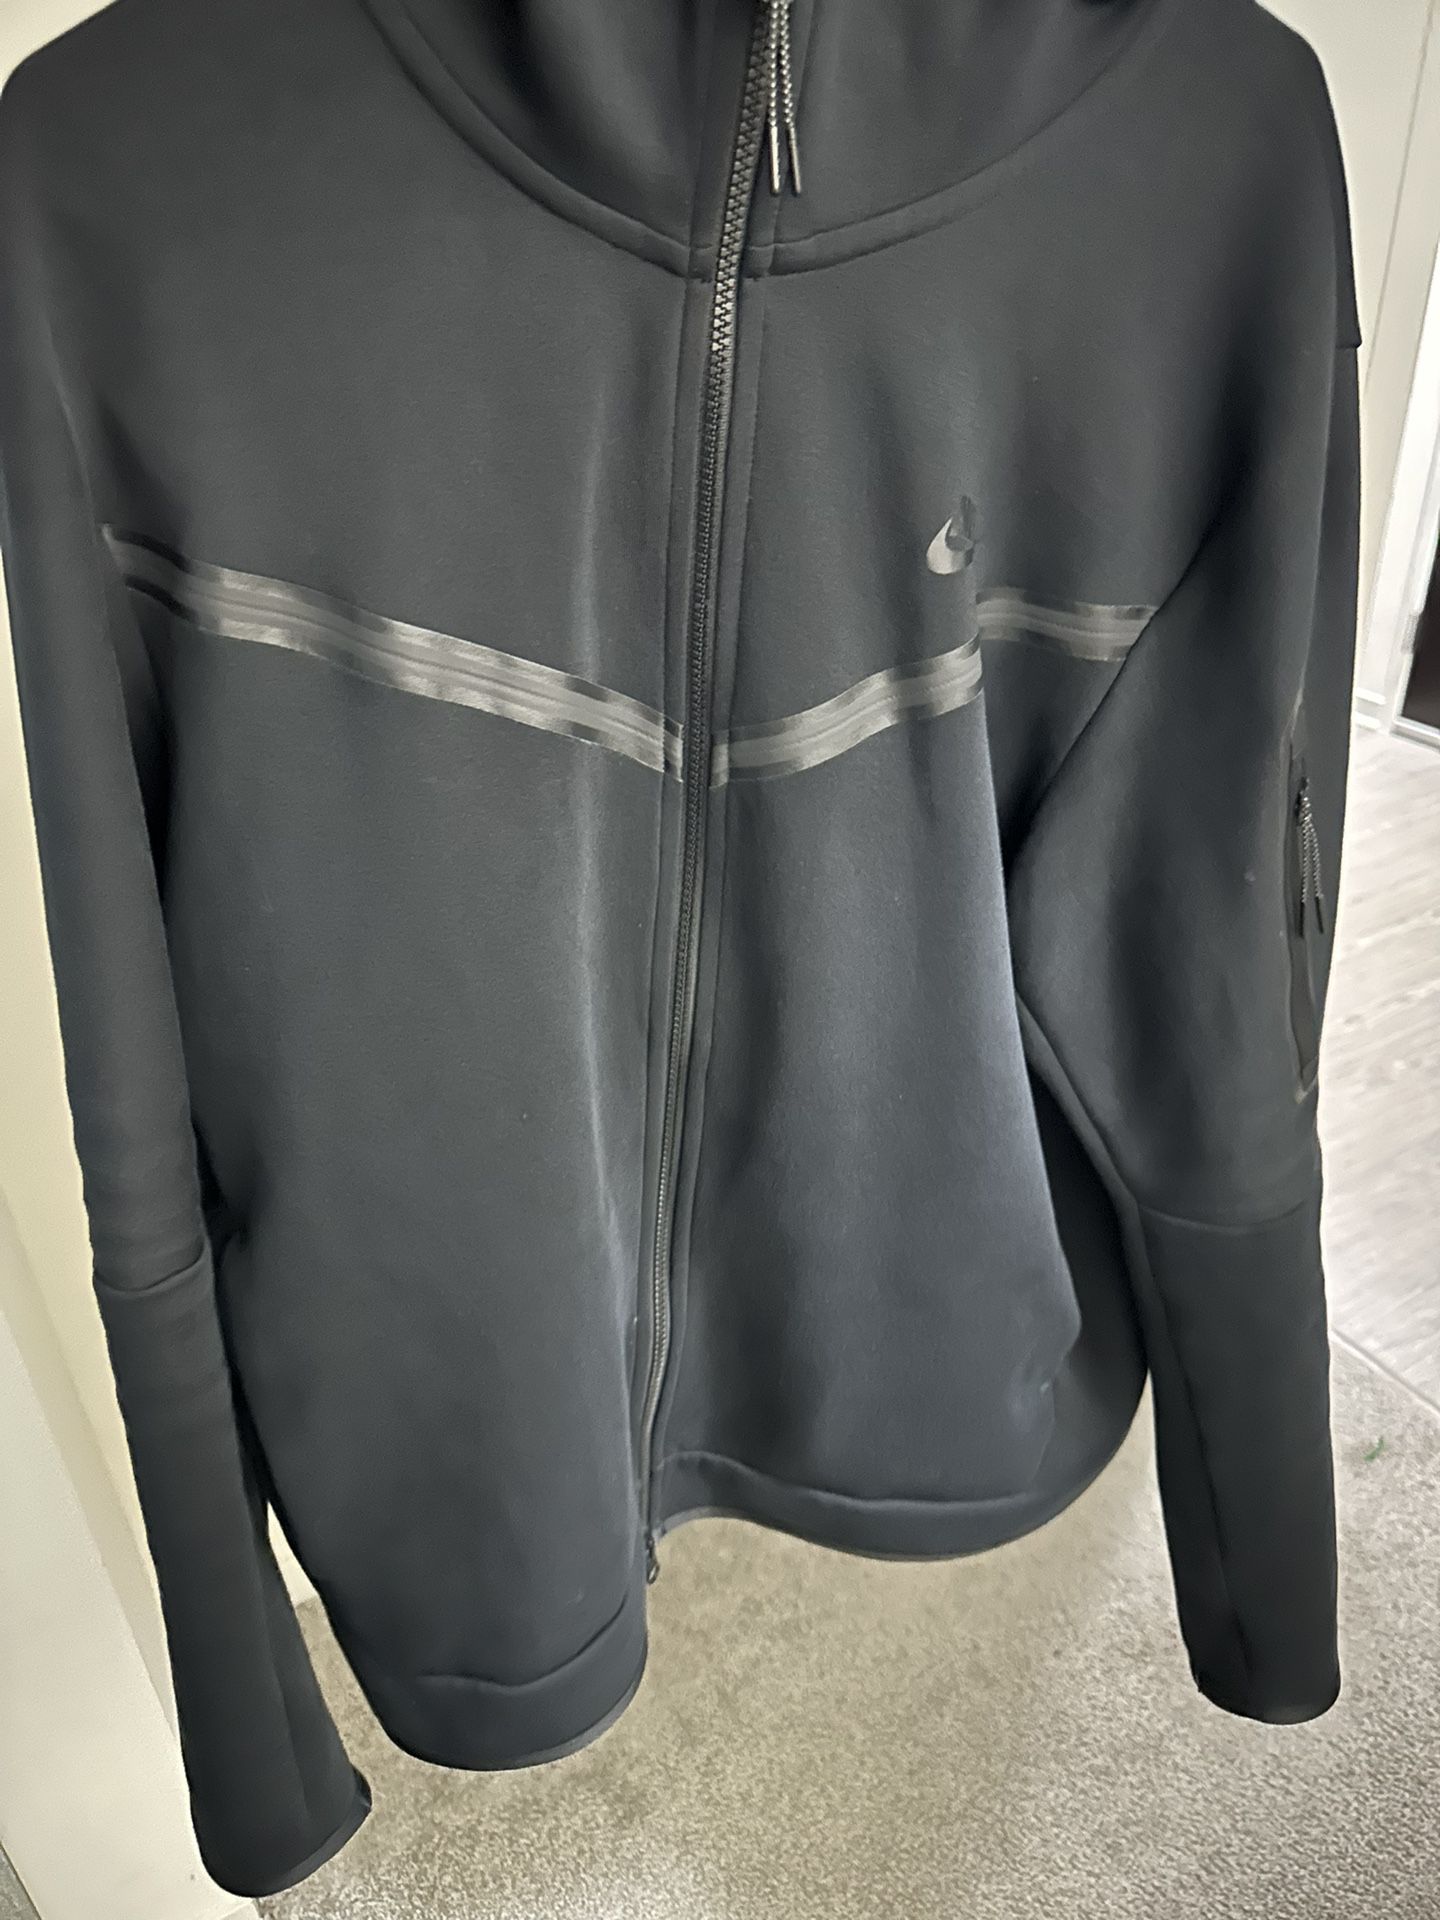 Nike Top With Bottoms Size Large 